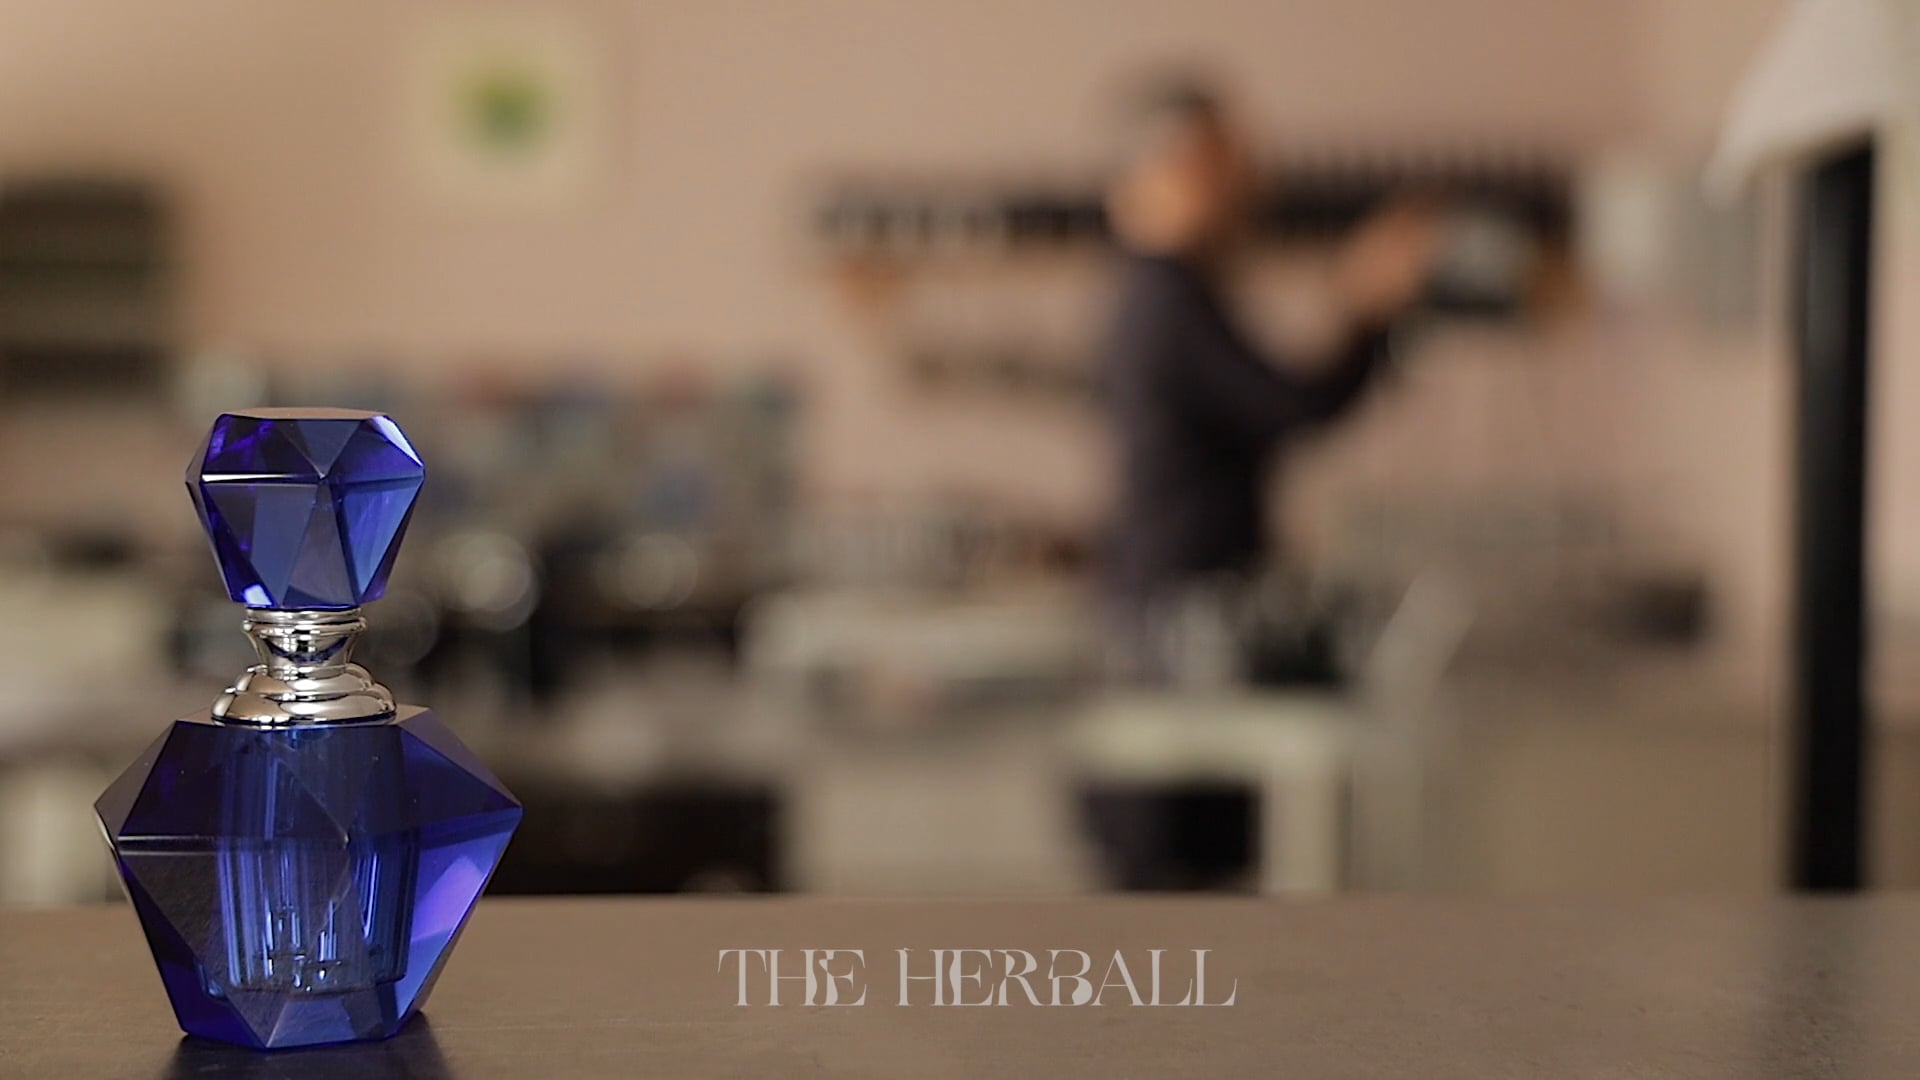 THE HERBALL